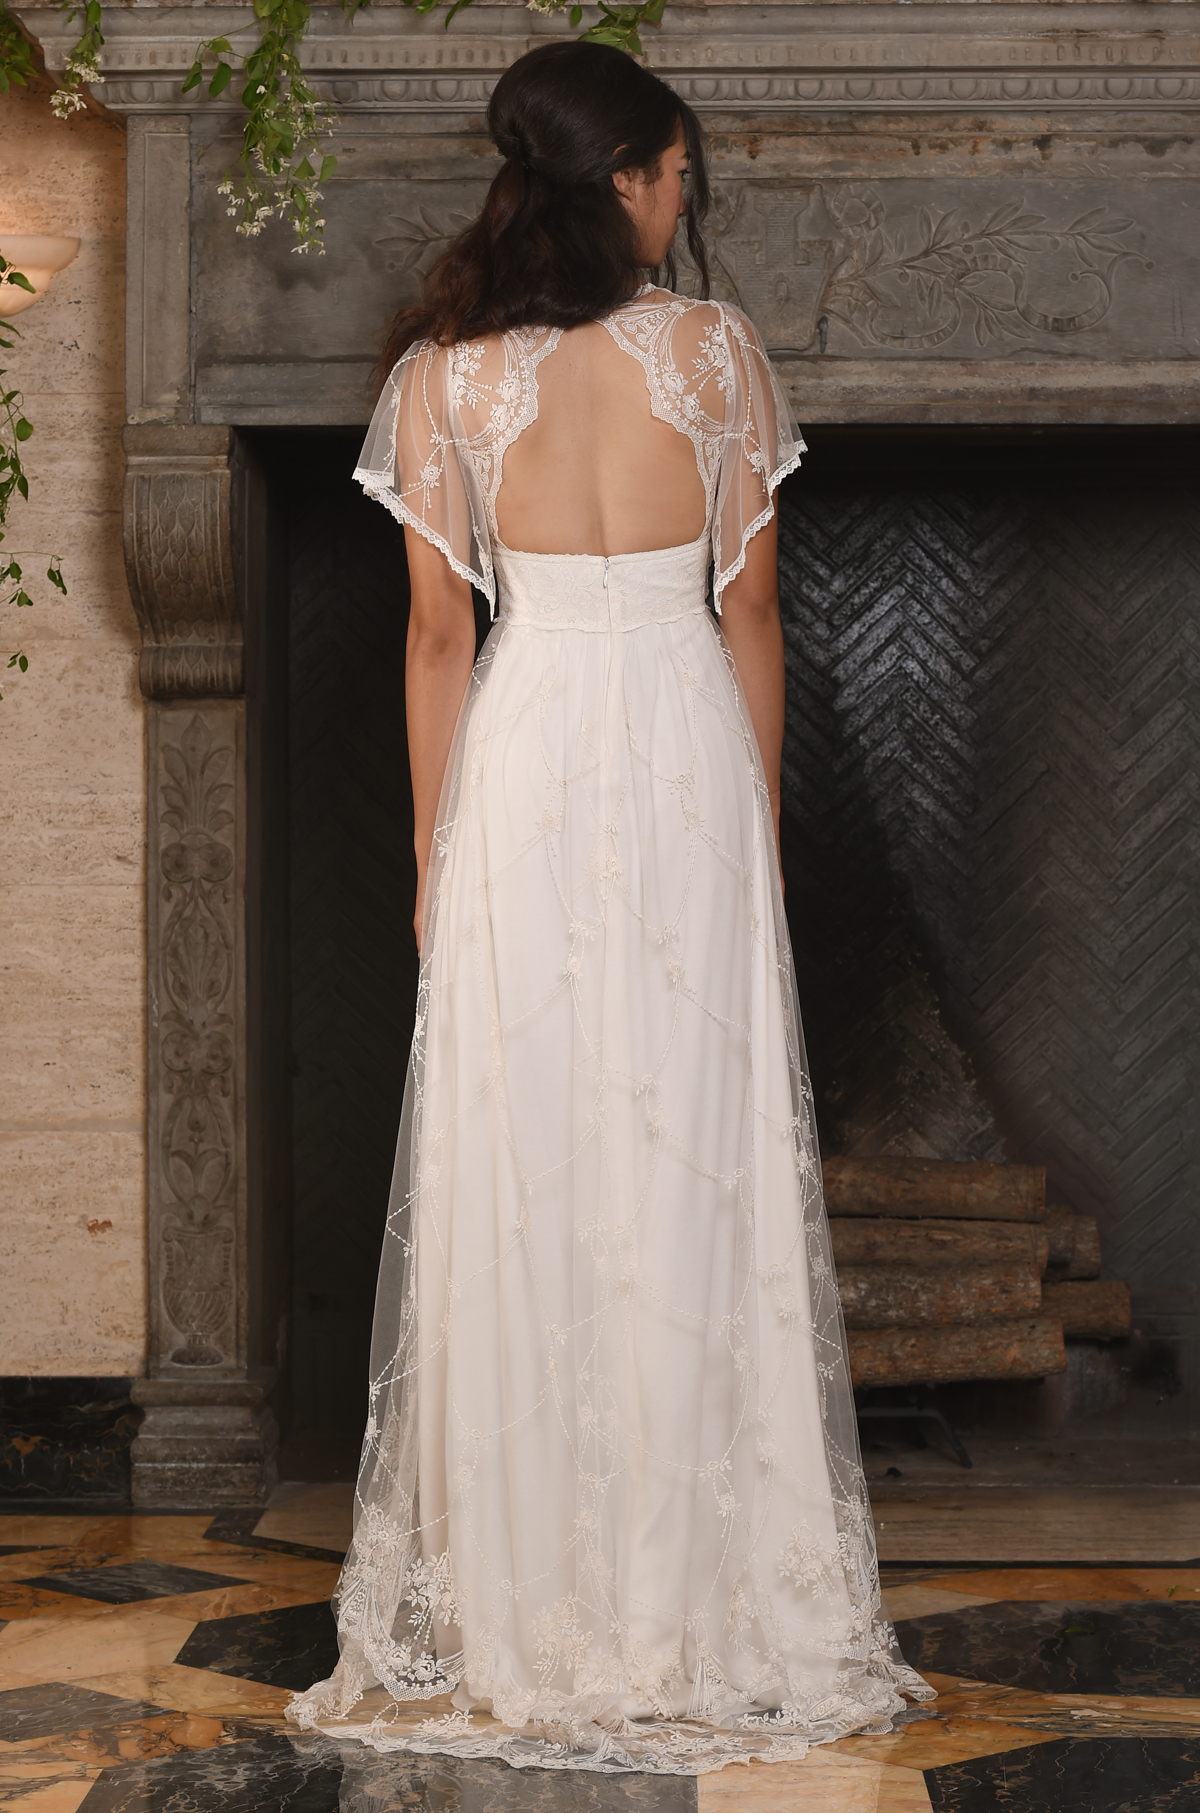 The Theia gown, from Claire Pettibone's 'The Four Seasons' bridal couture collection for 2017.